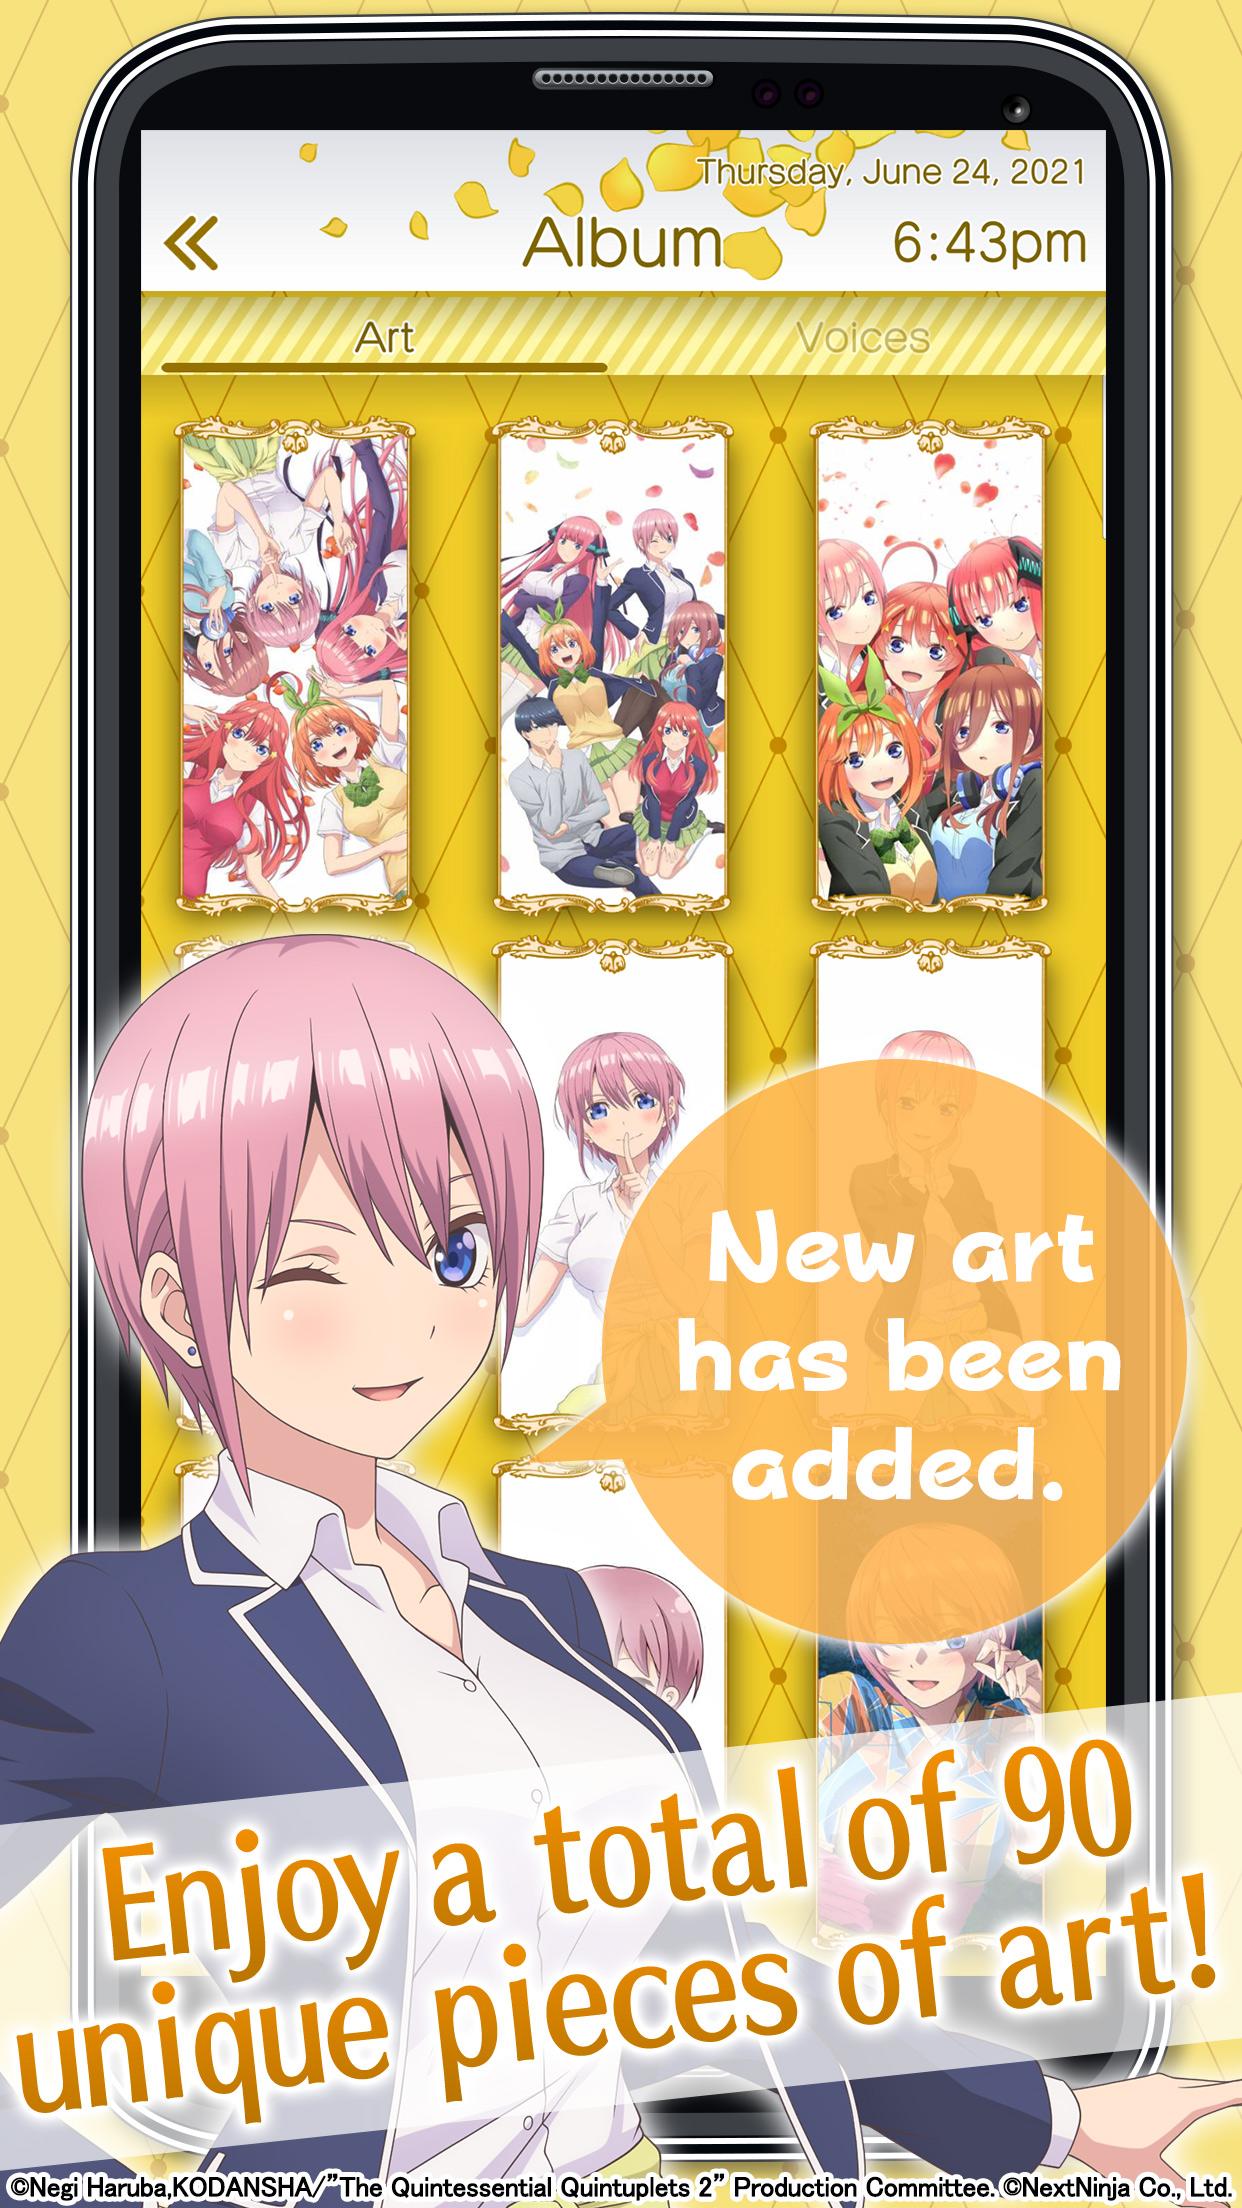 Quintuplets Alarm - Ichika Latest Version 1.0.0 for Android